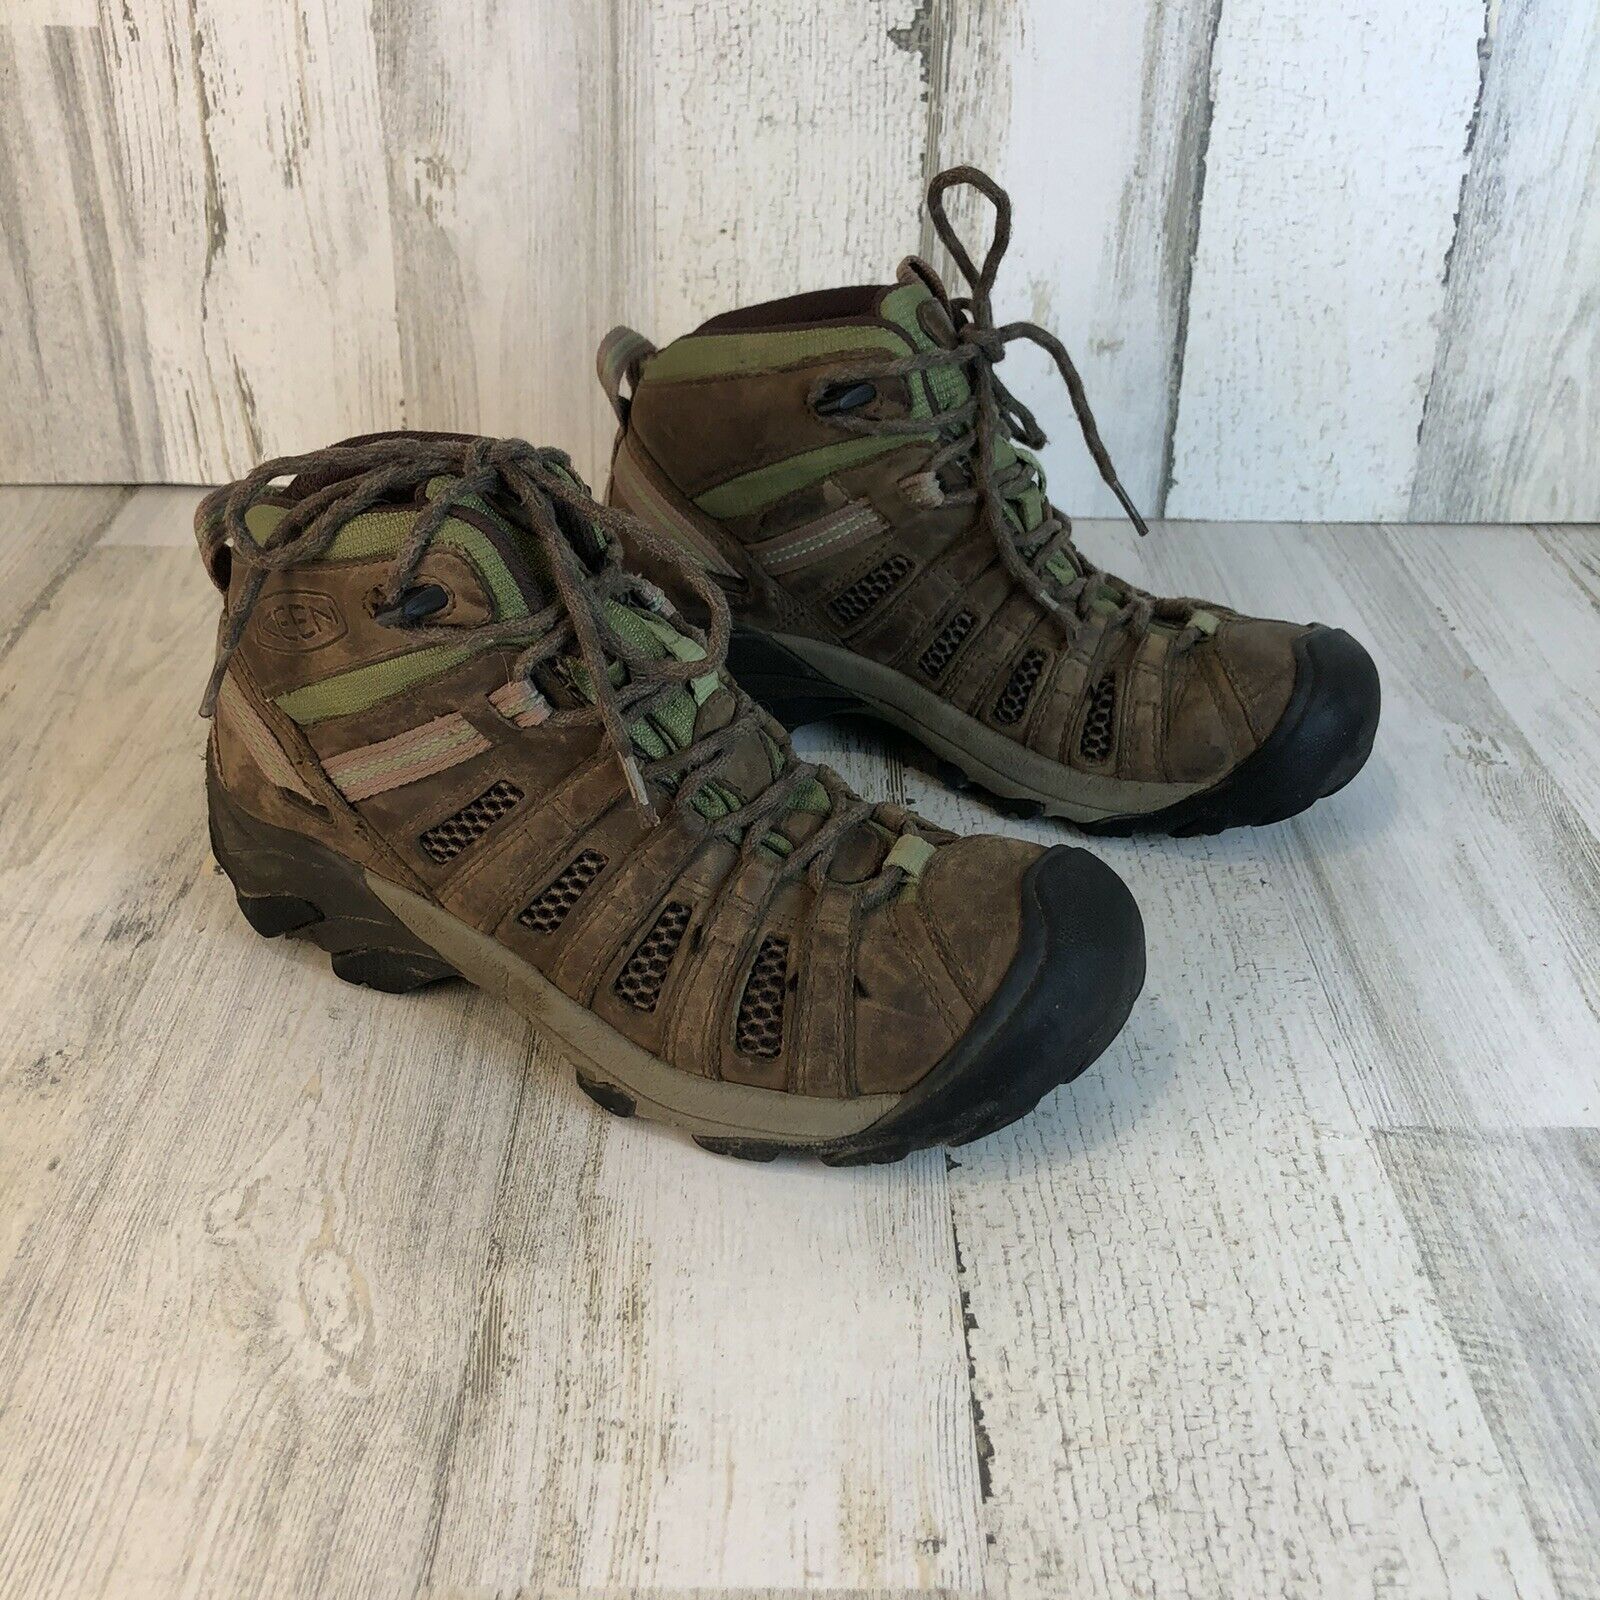 KEEN "Voyageur" Women’s Mid Hiking Boots Vented Breathable Green/ Brown Sz 7